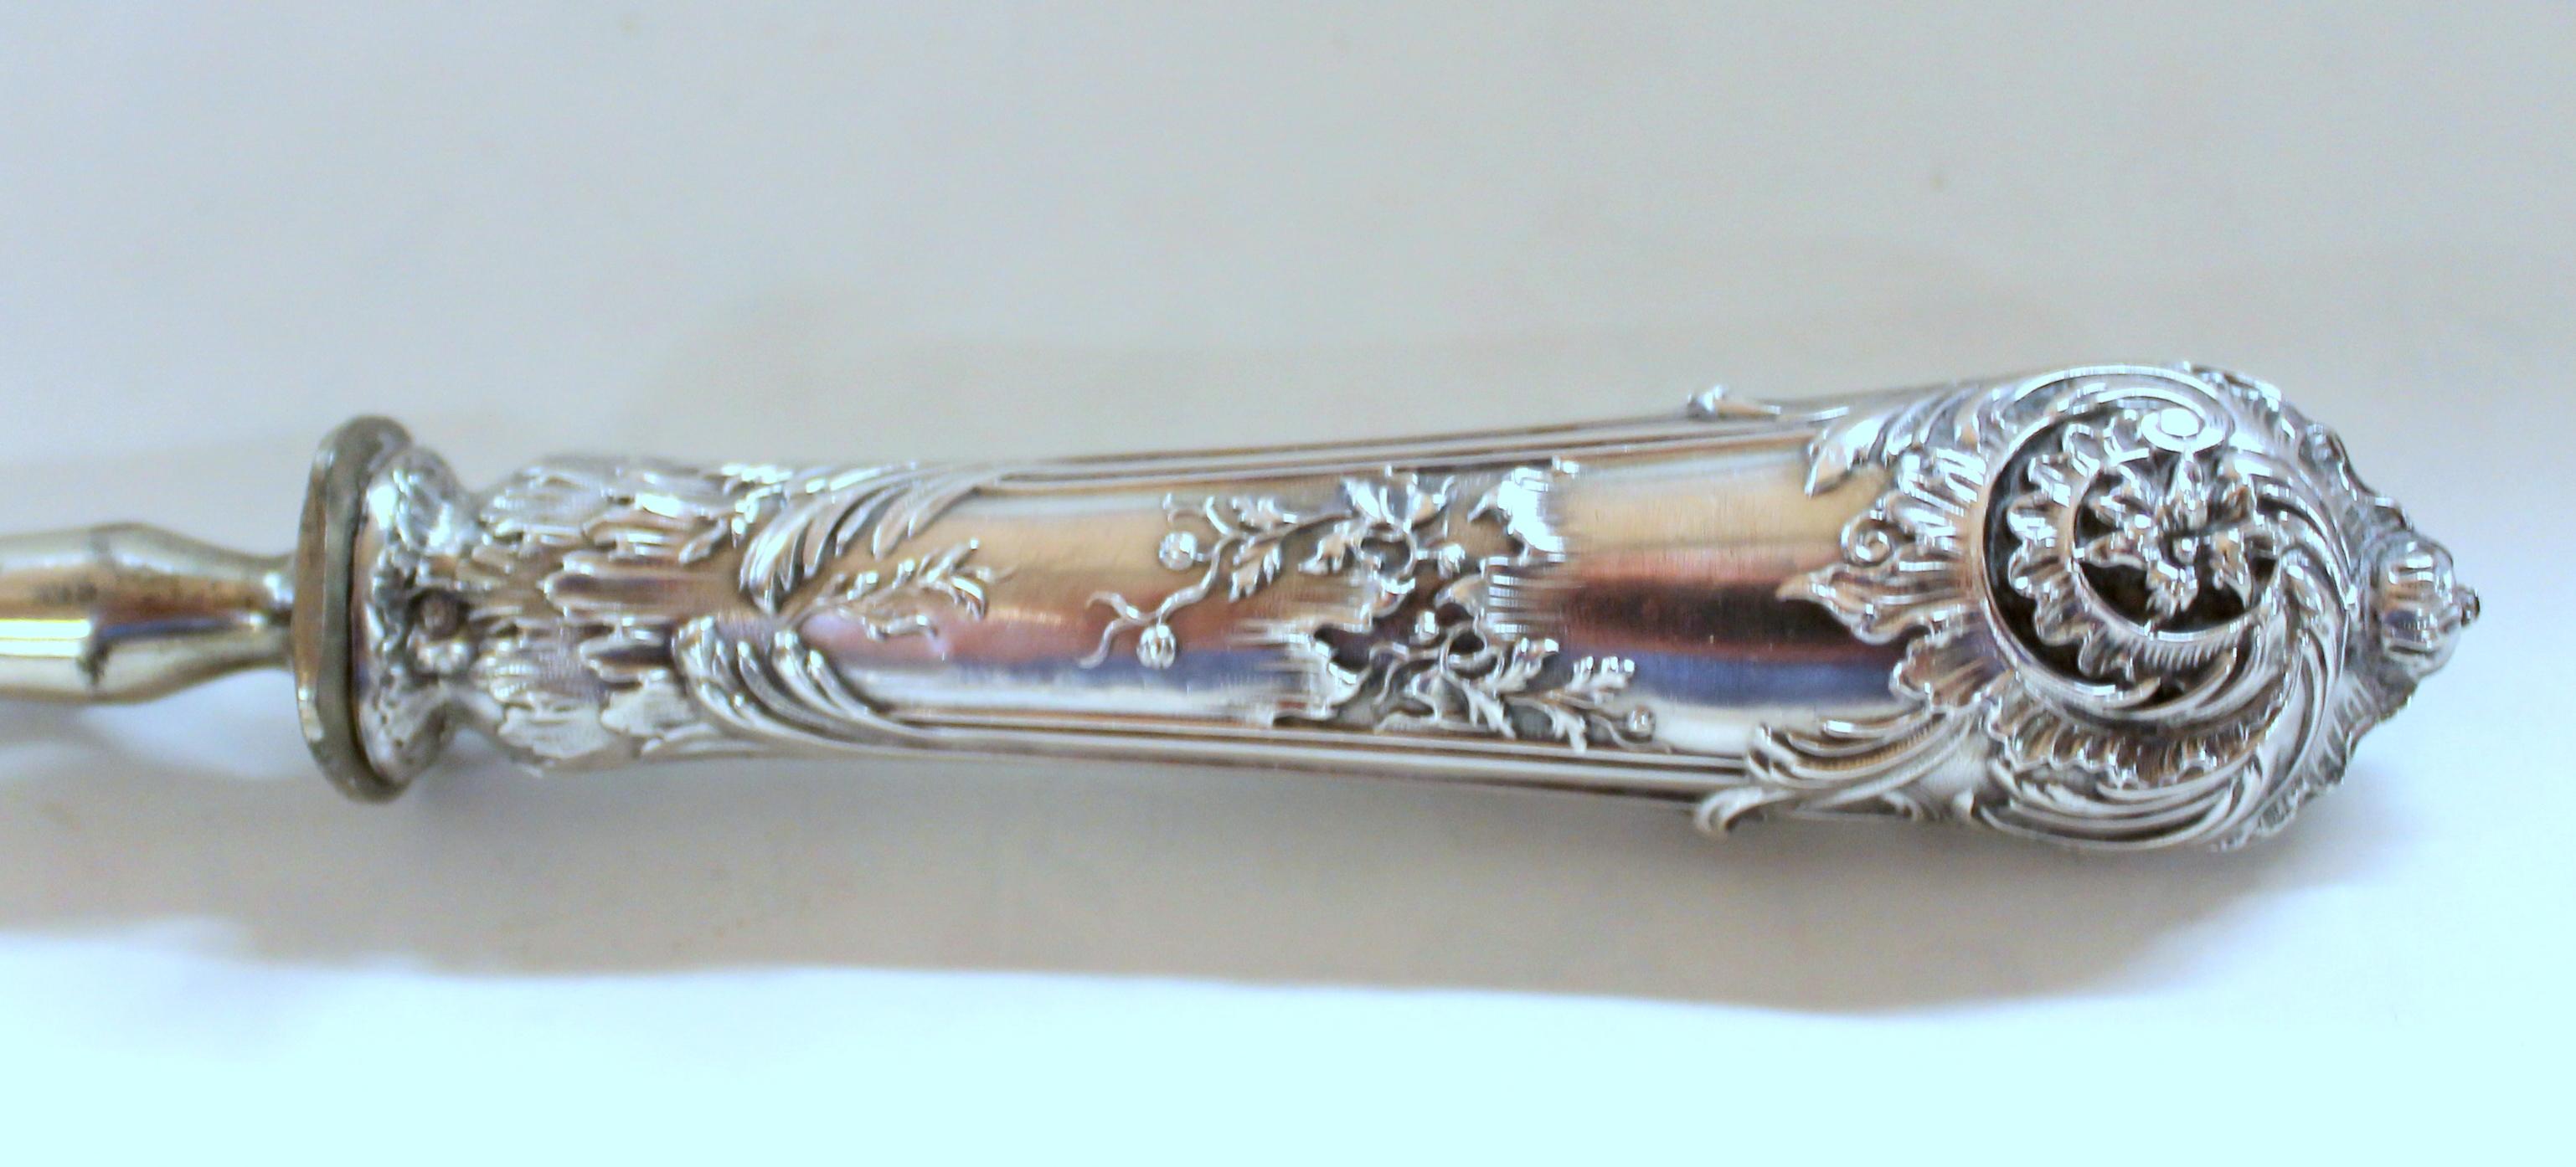 Antique French .950 Silver Rococo Style 3 Pc Carving Set with Rare Gigot For Sale 3